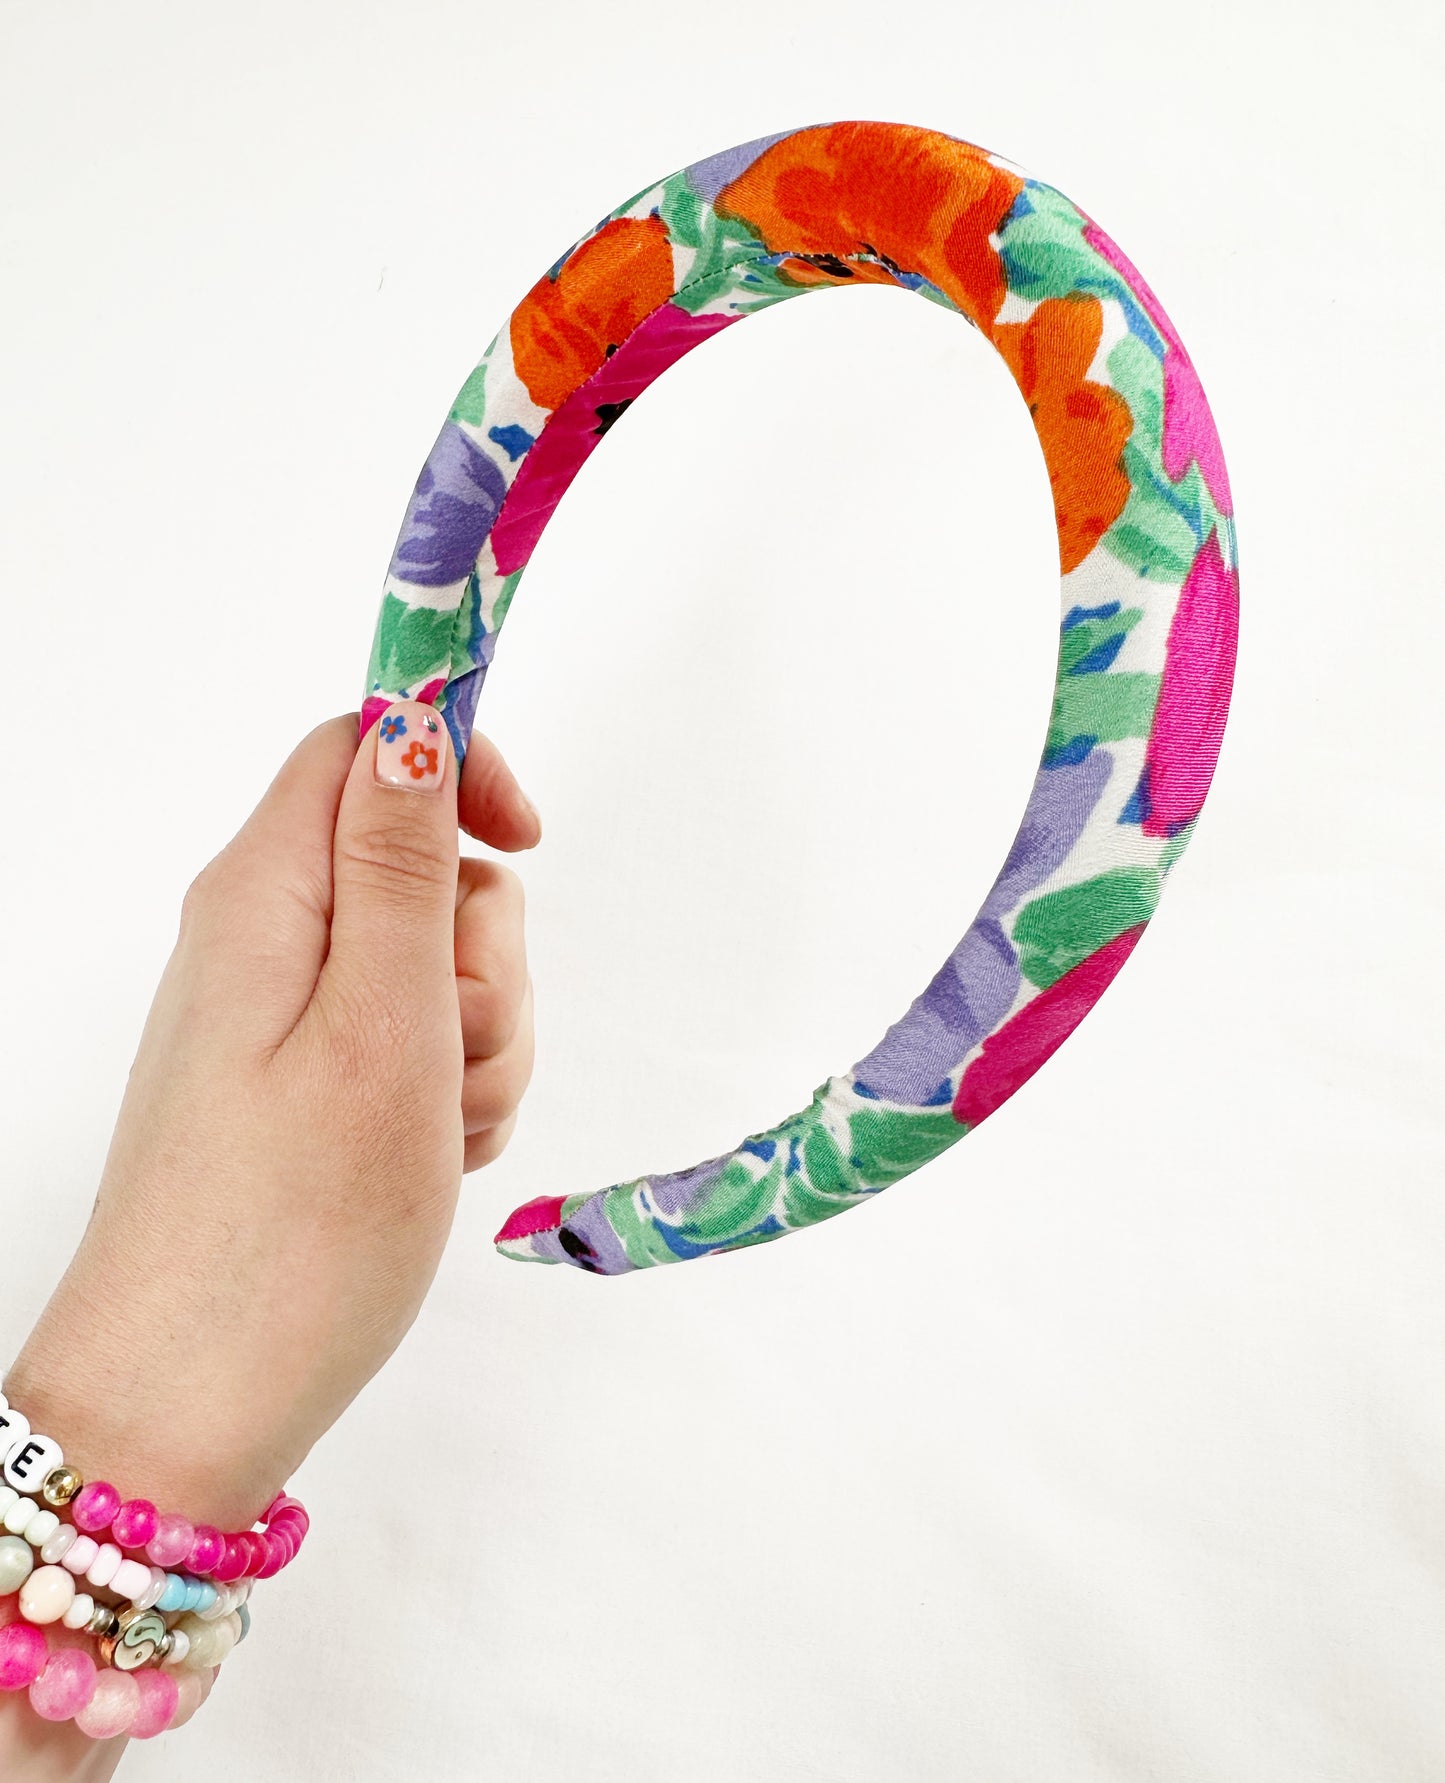 Classic Headband in Bright Floral